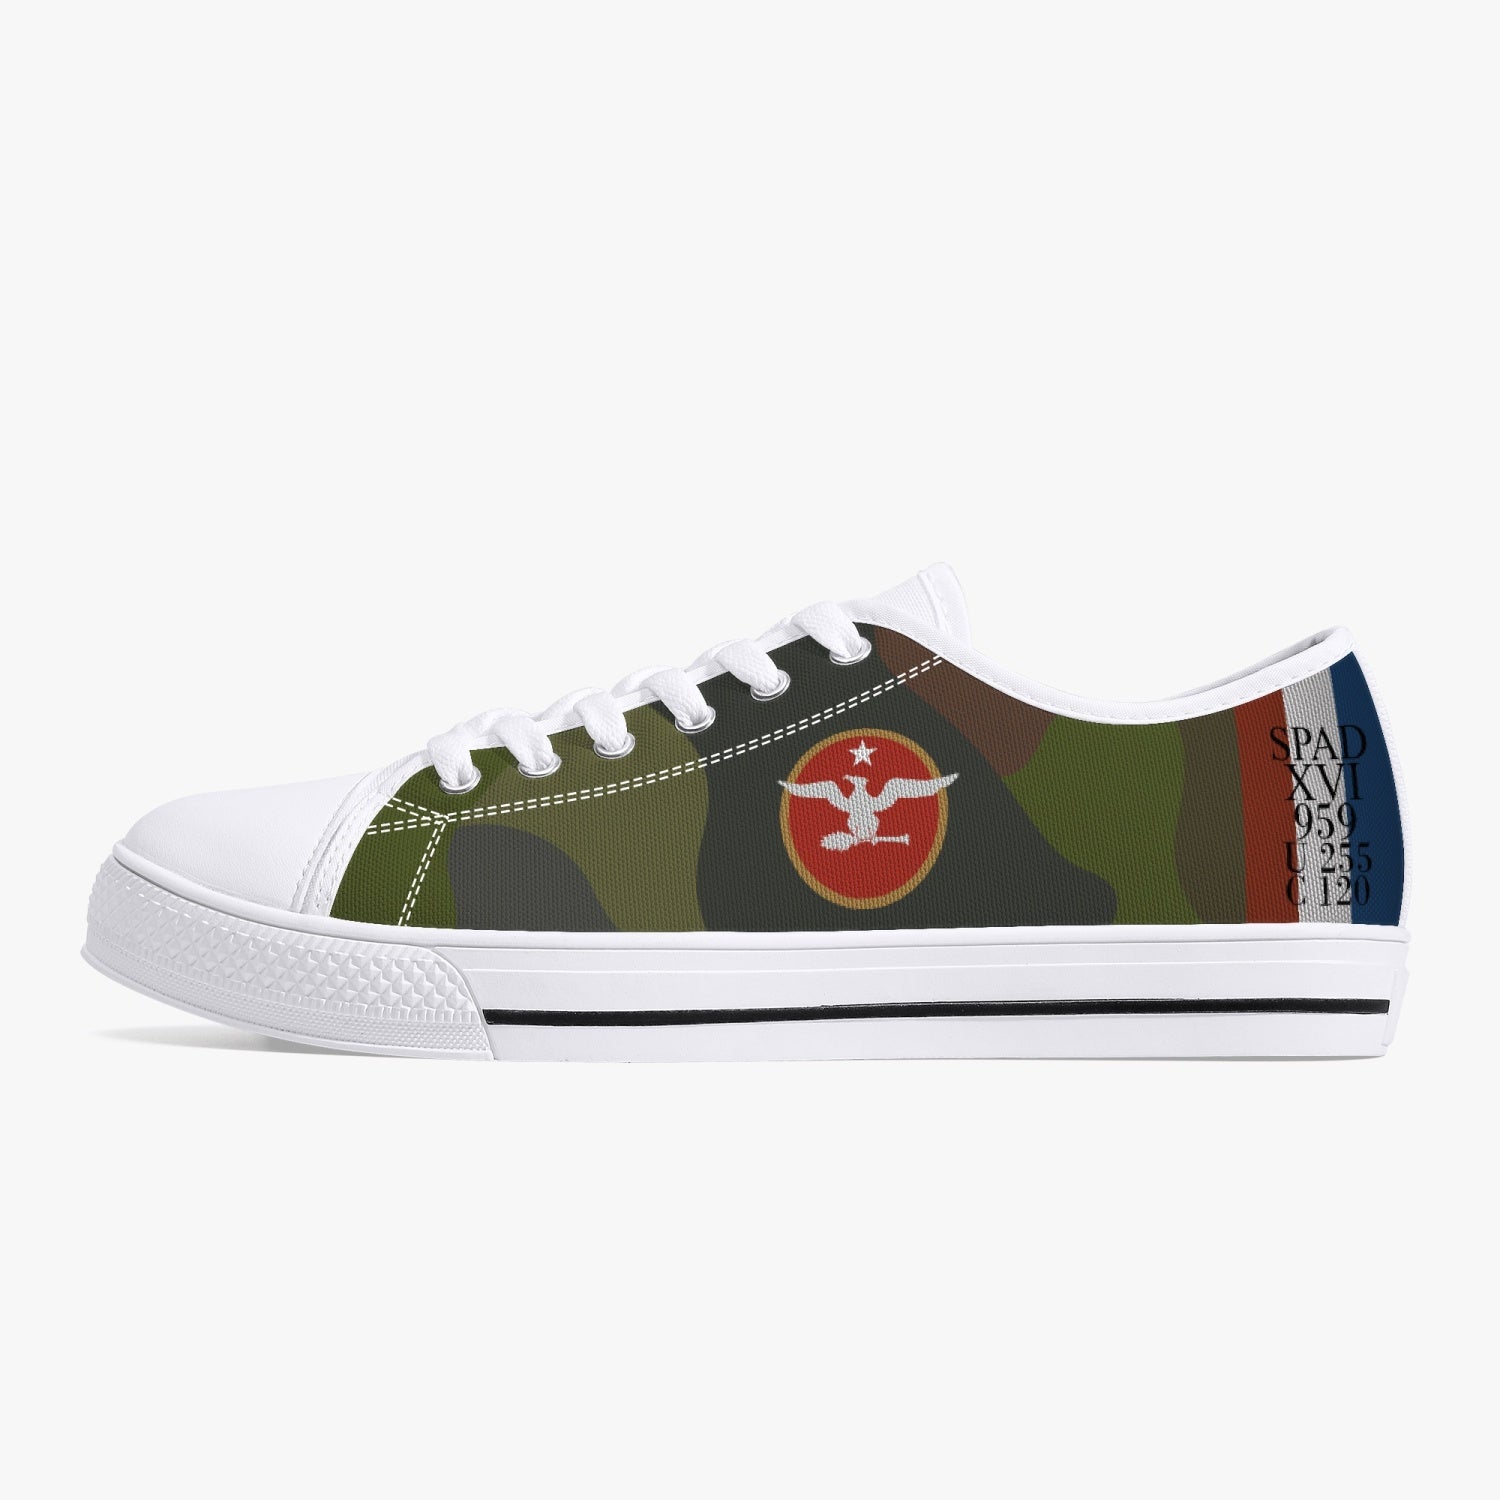 SPAD XVI of Billy Mitchell Low Top Canvas Shoes - I Love a Hangar